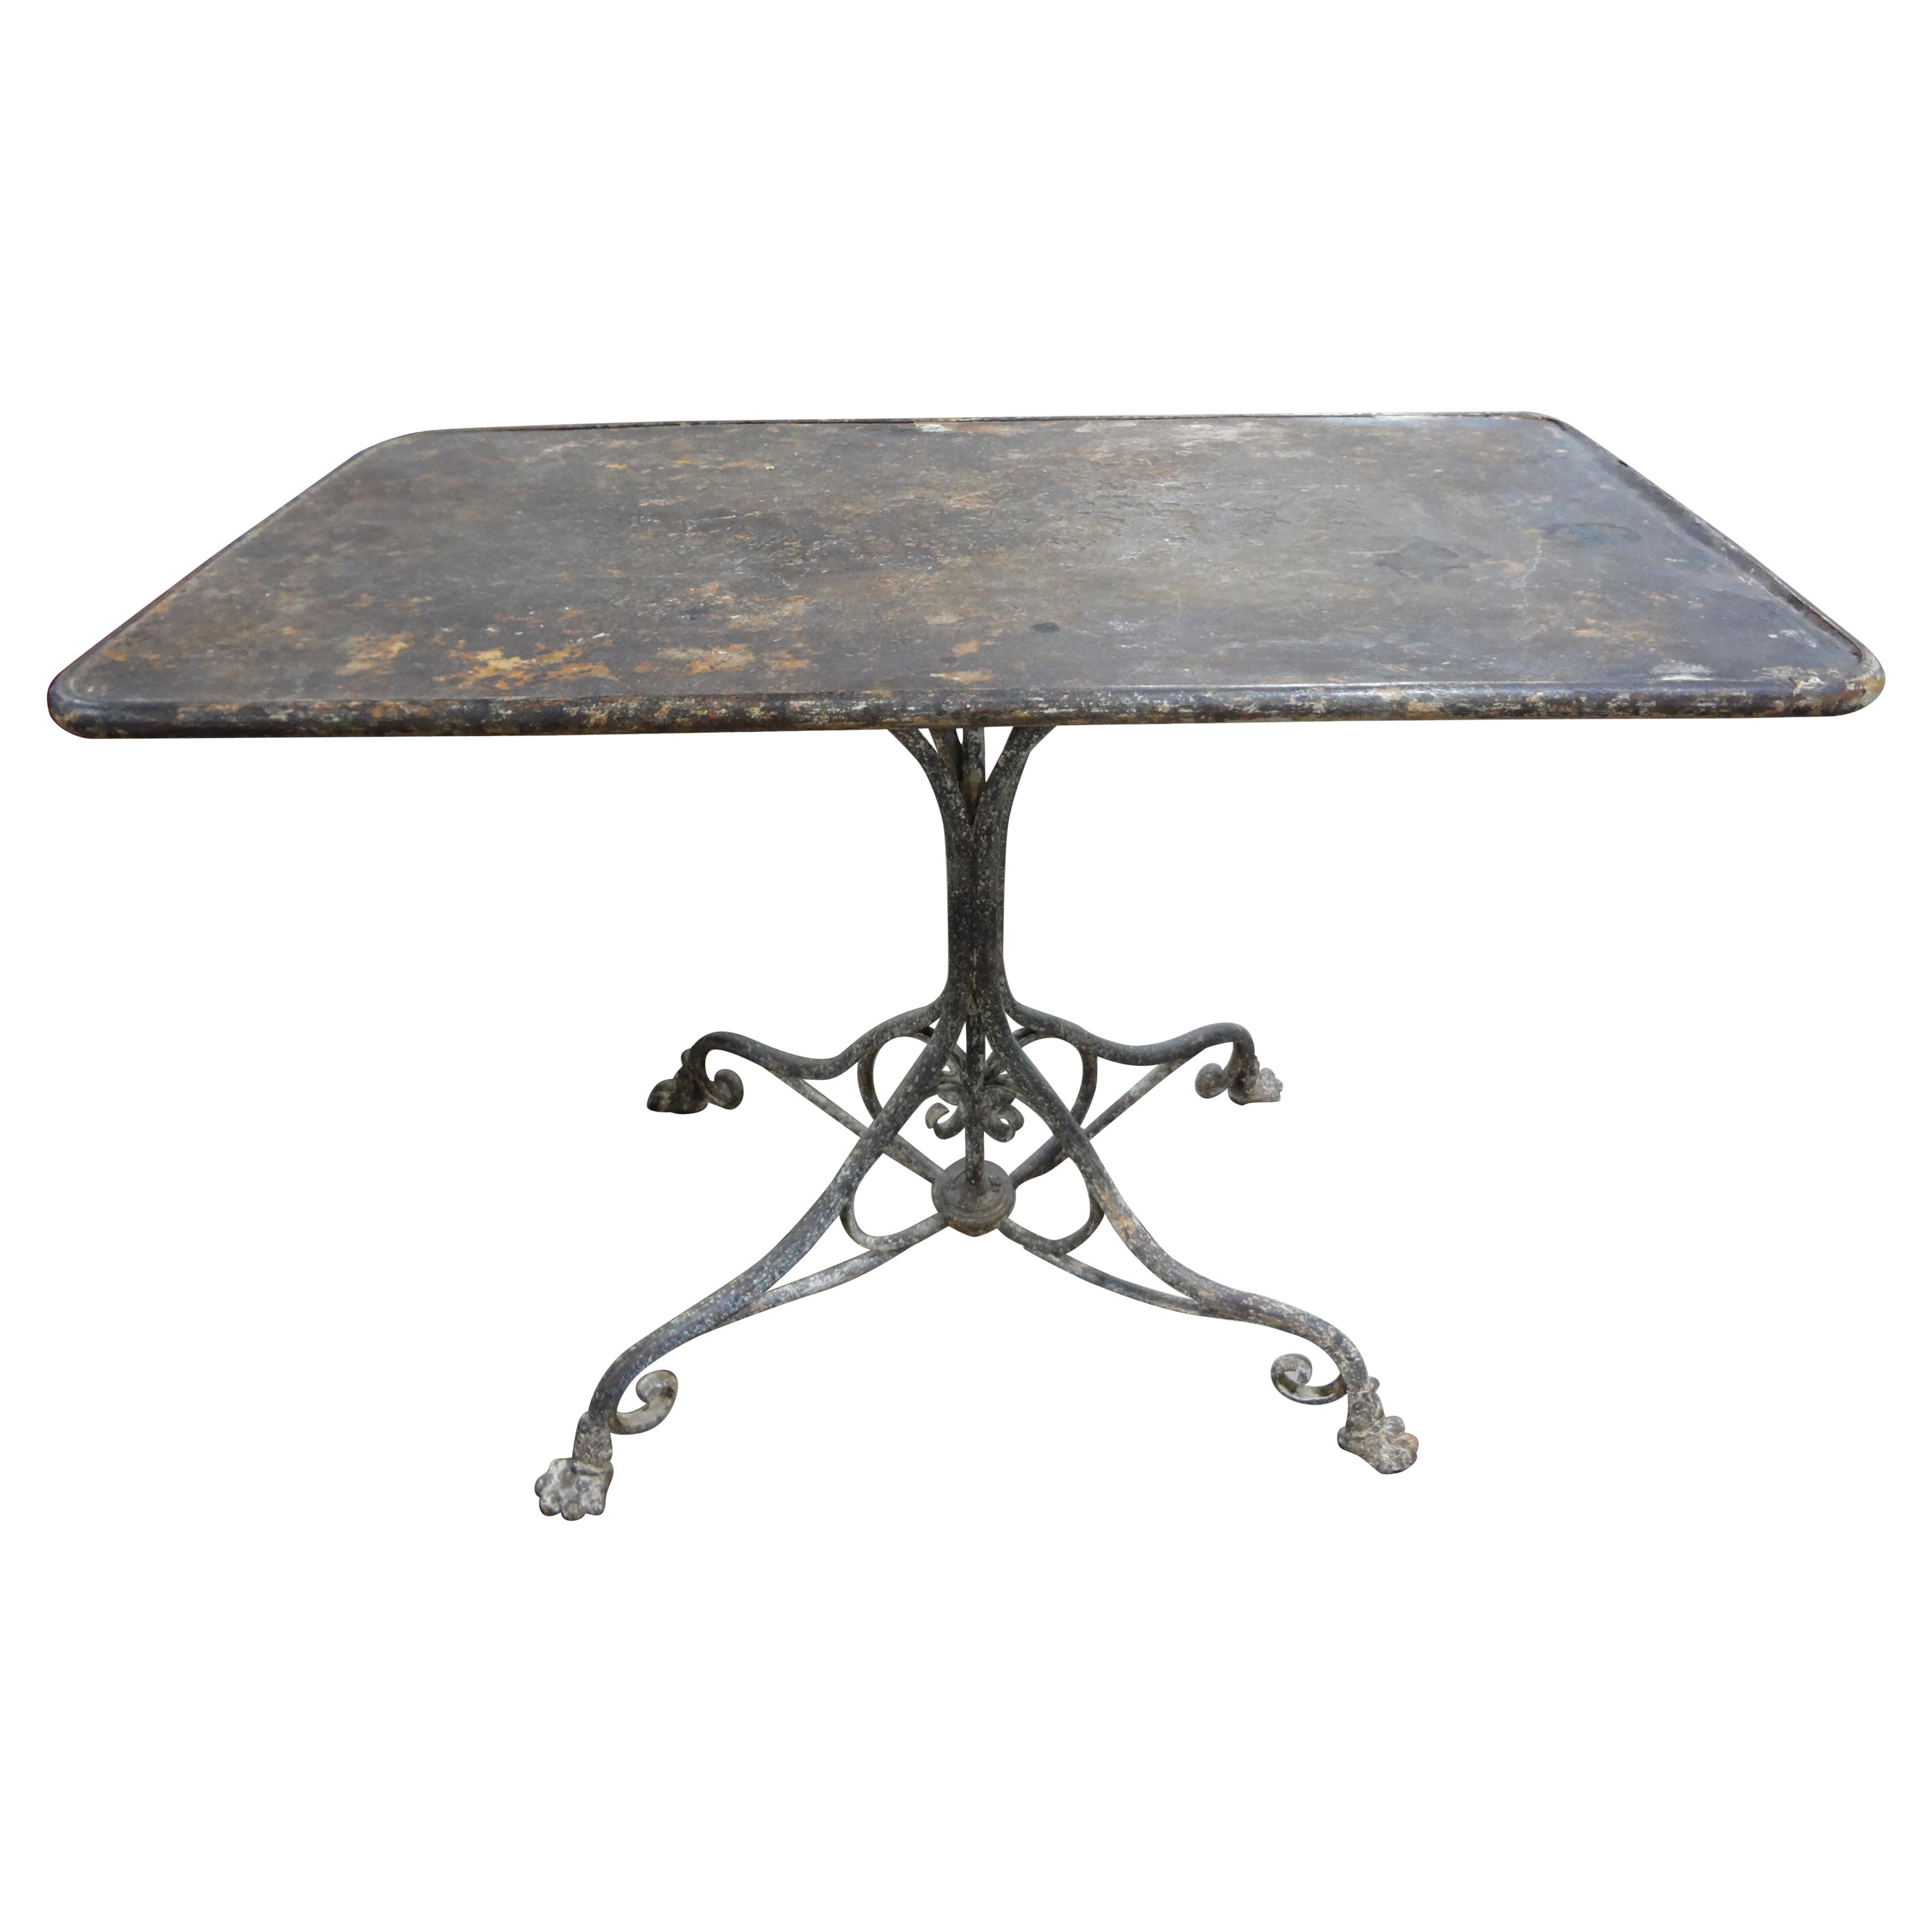 19th Century French Iron Garden Table By Arras For Sale